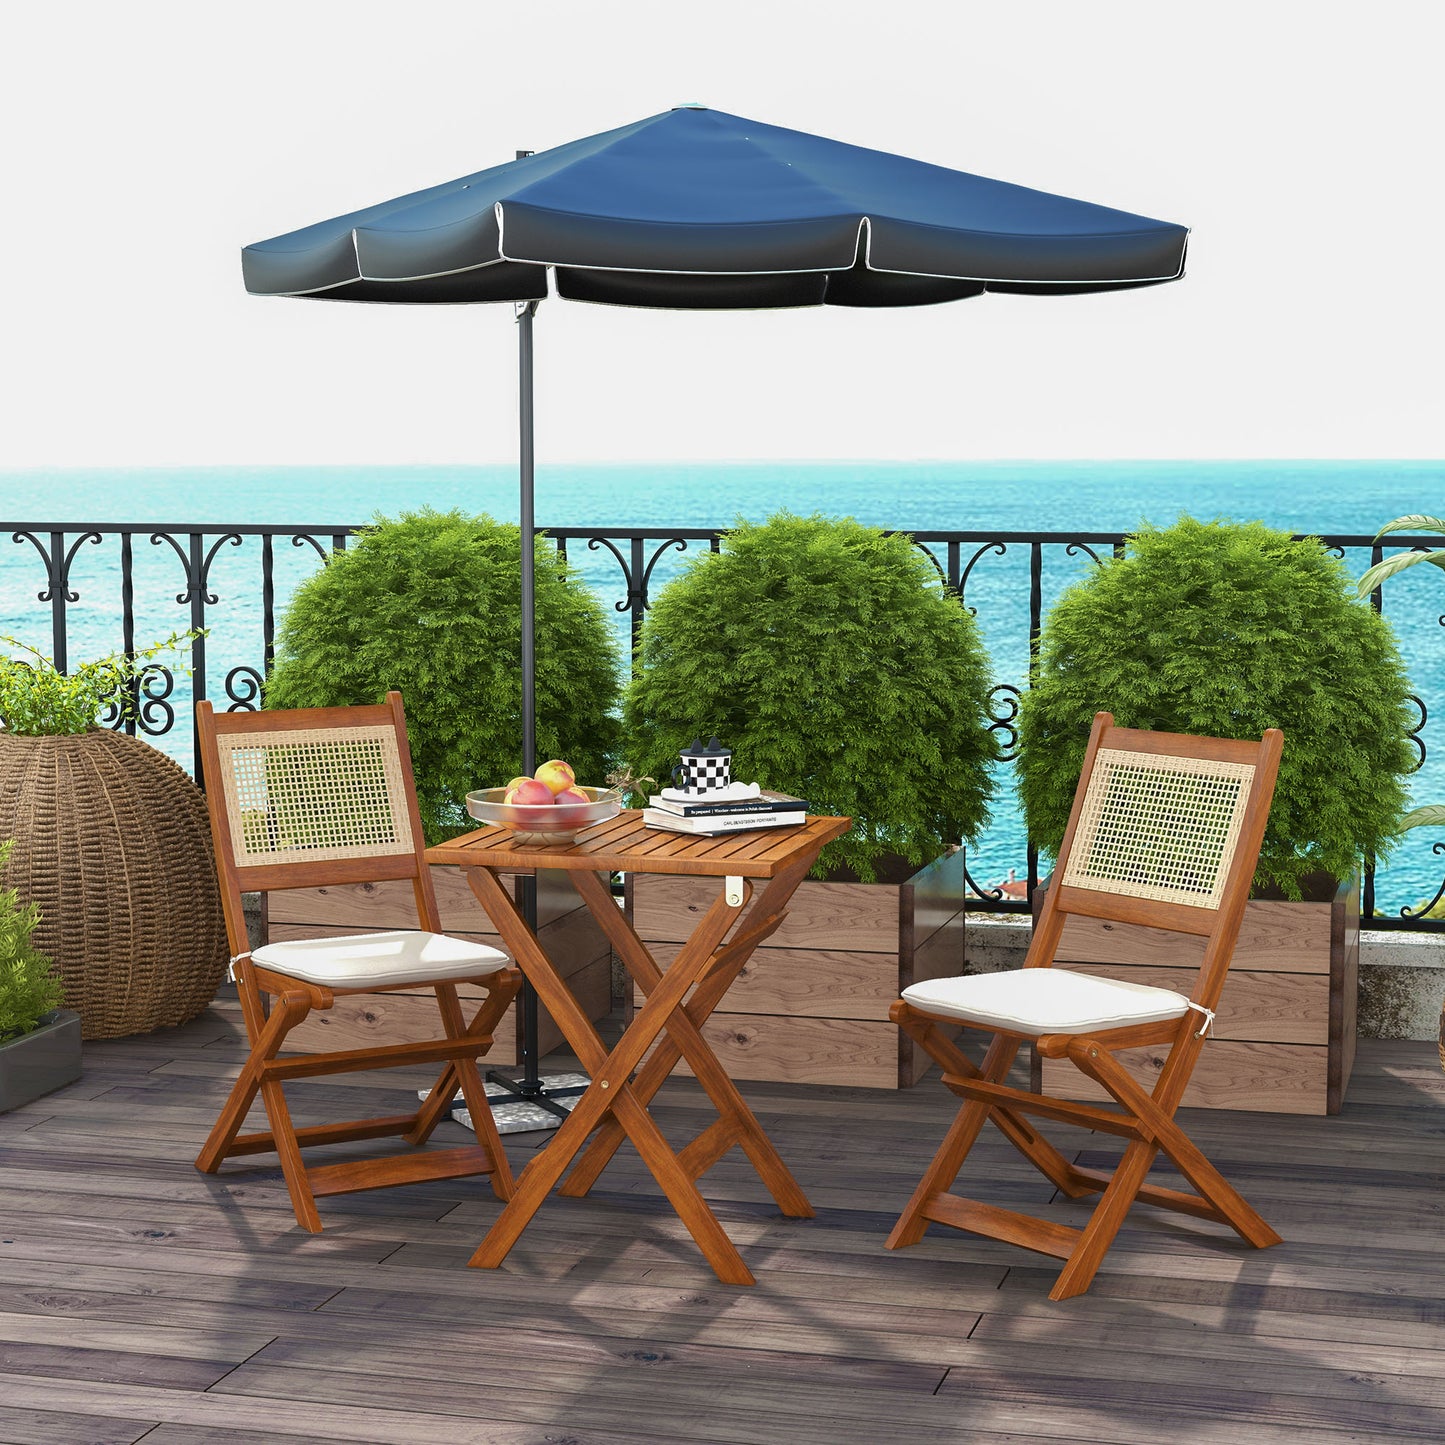 Outsunny Three-Piece Wooden Folding Bistro Dining Set - Natural